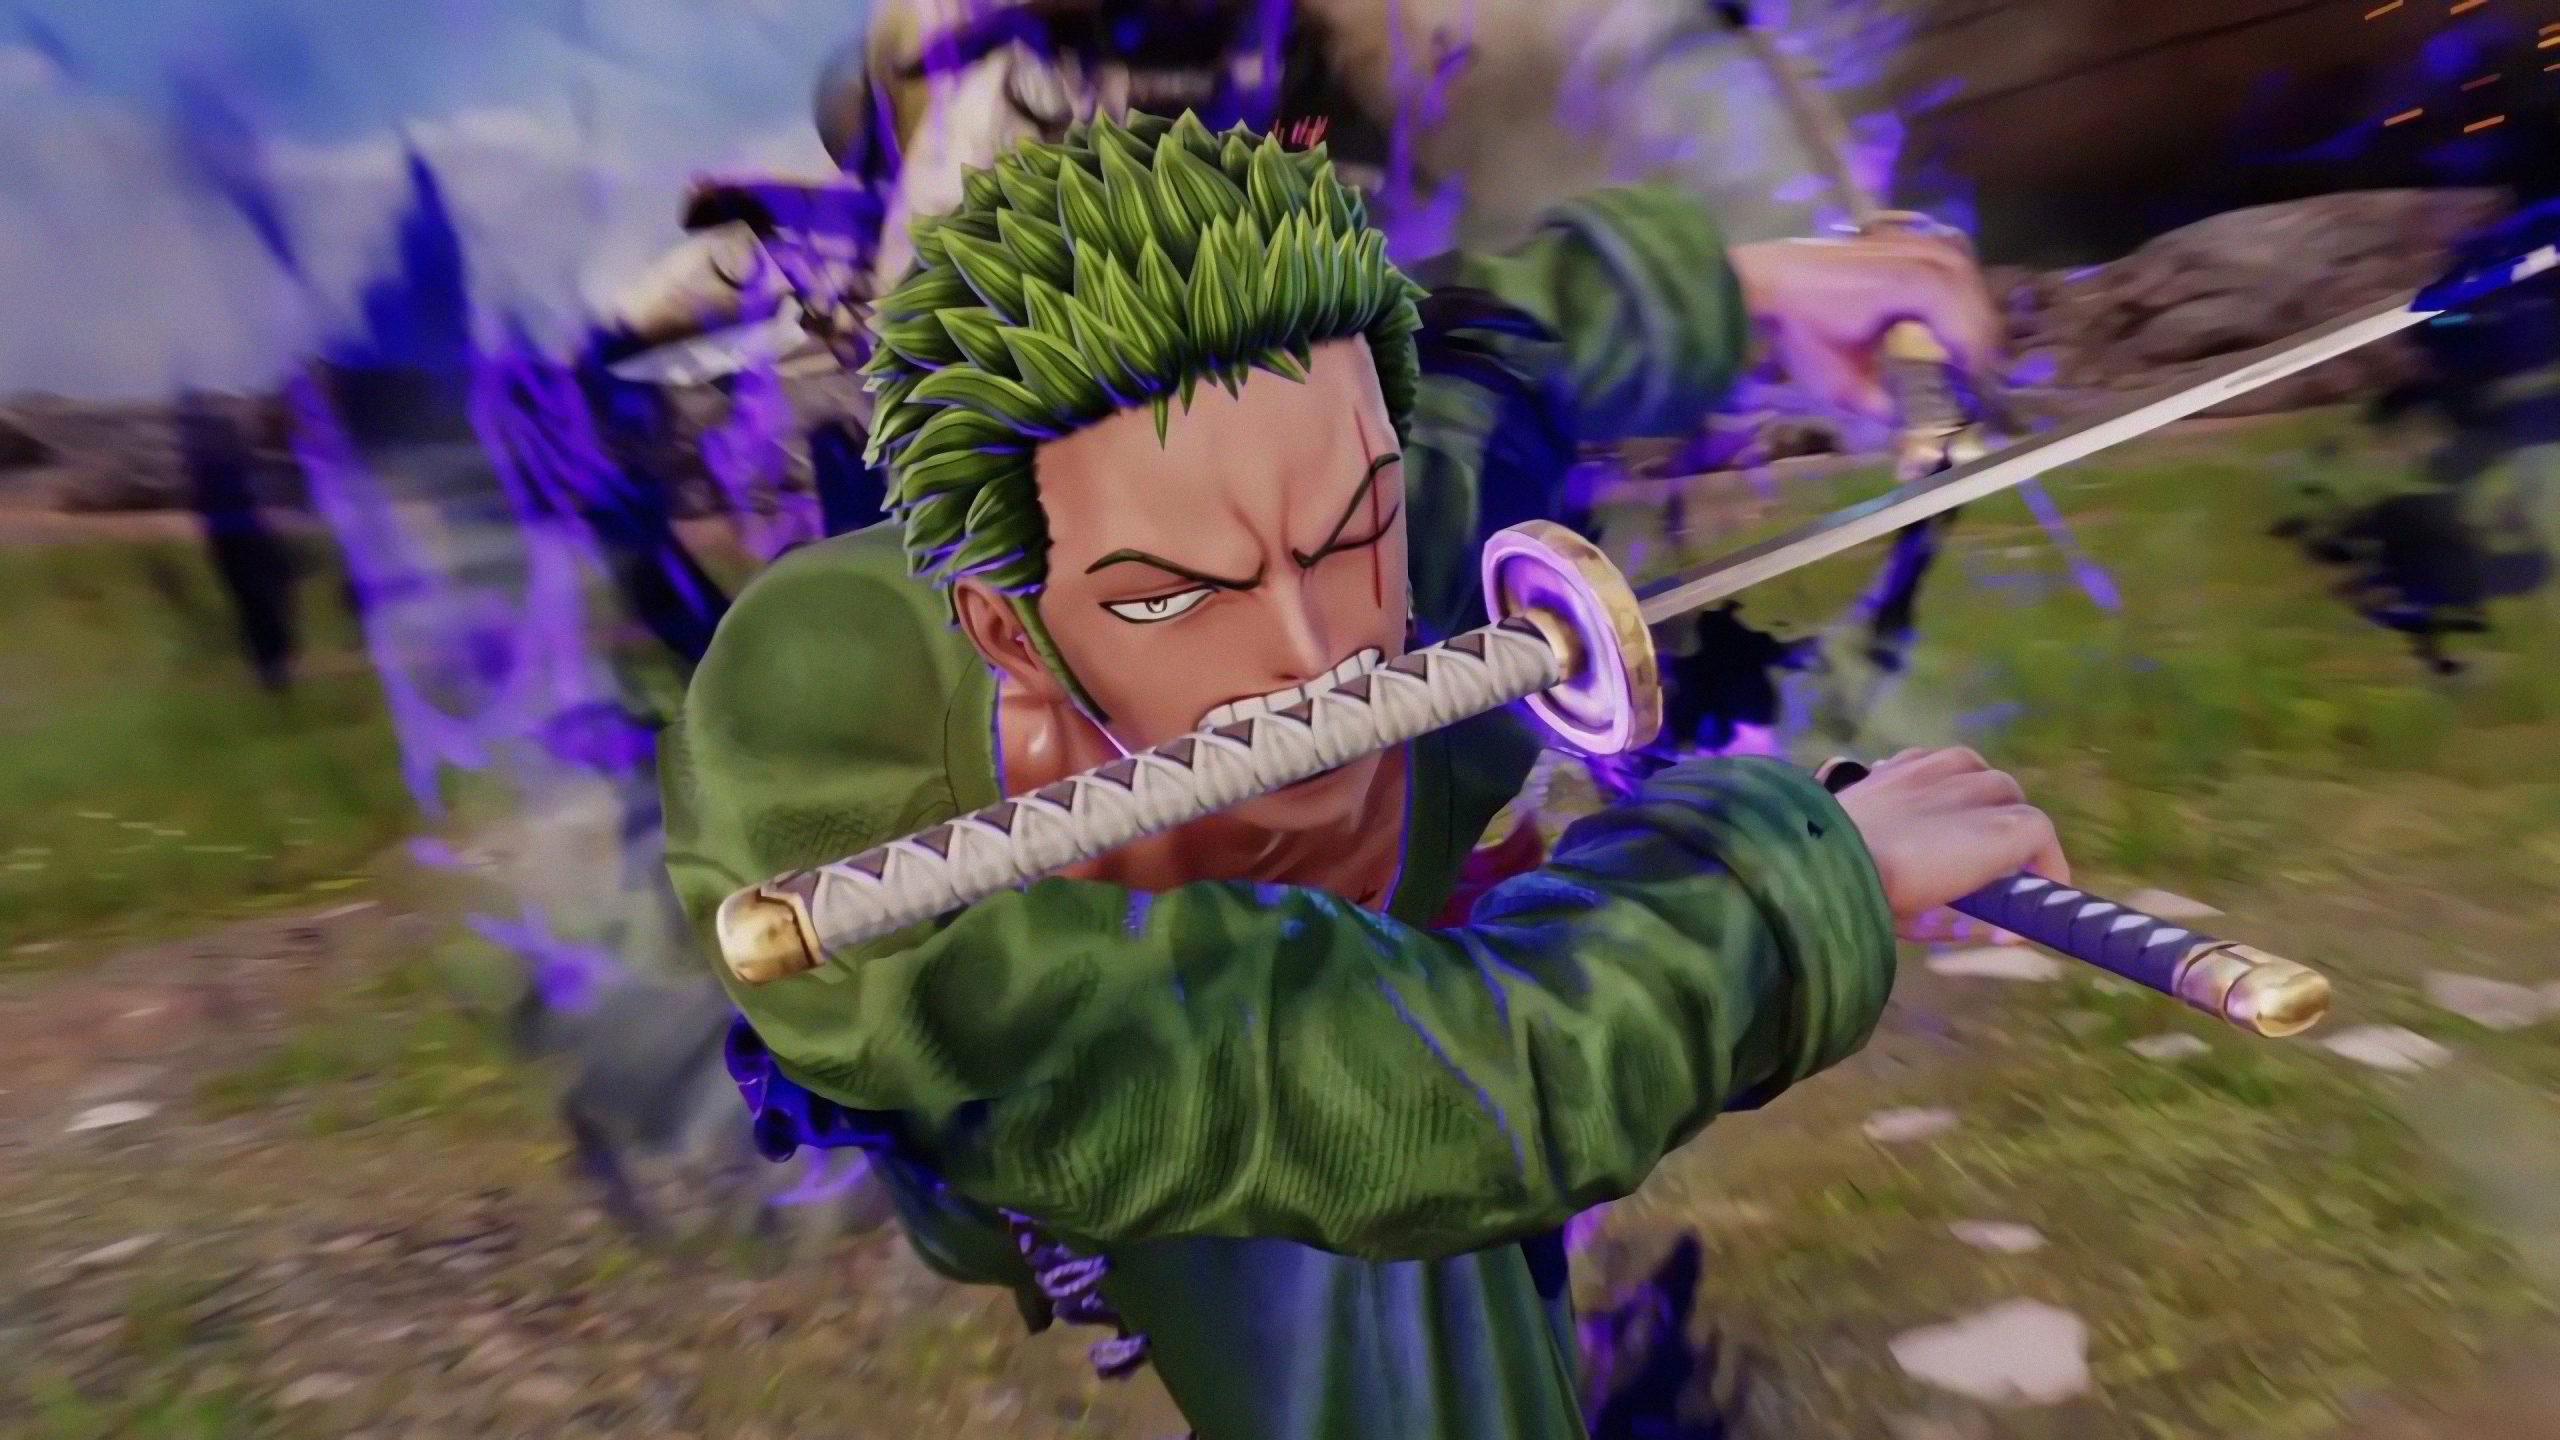 Download jump force, roronoa zoro, video game, one piece, anime 2560x1440 wallpaper, dual wide 16:9 2560x1440 HD image, background, 19059